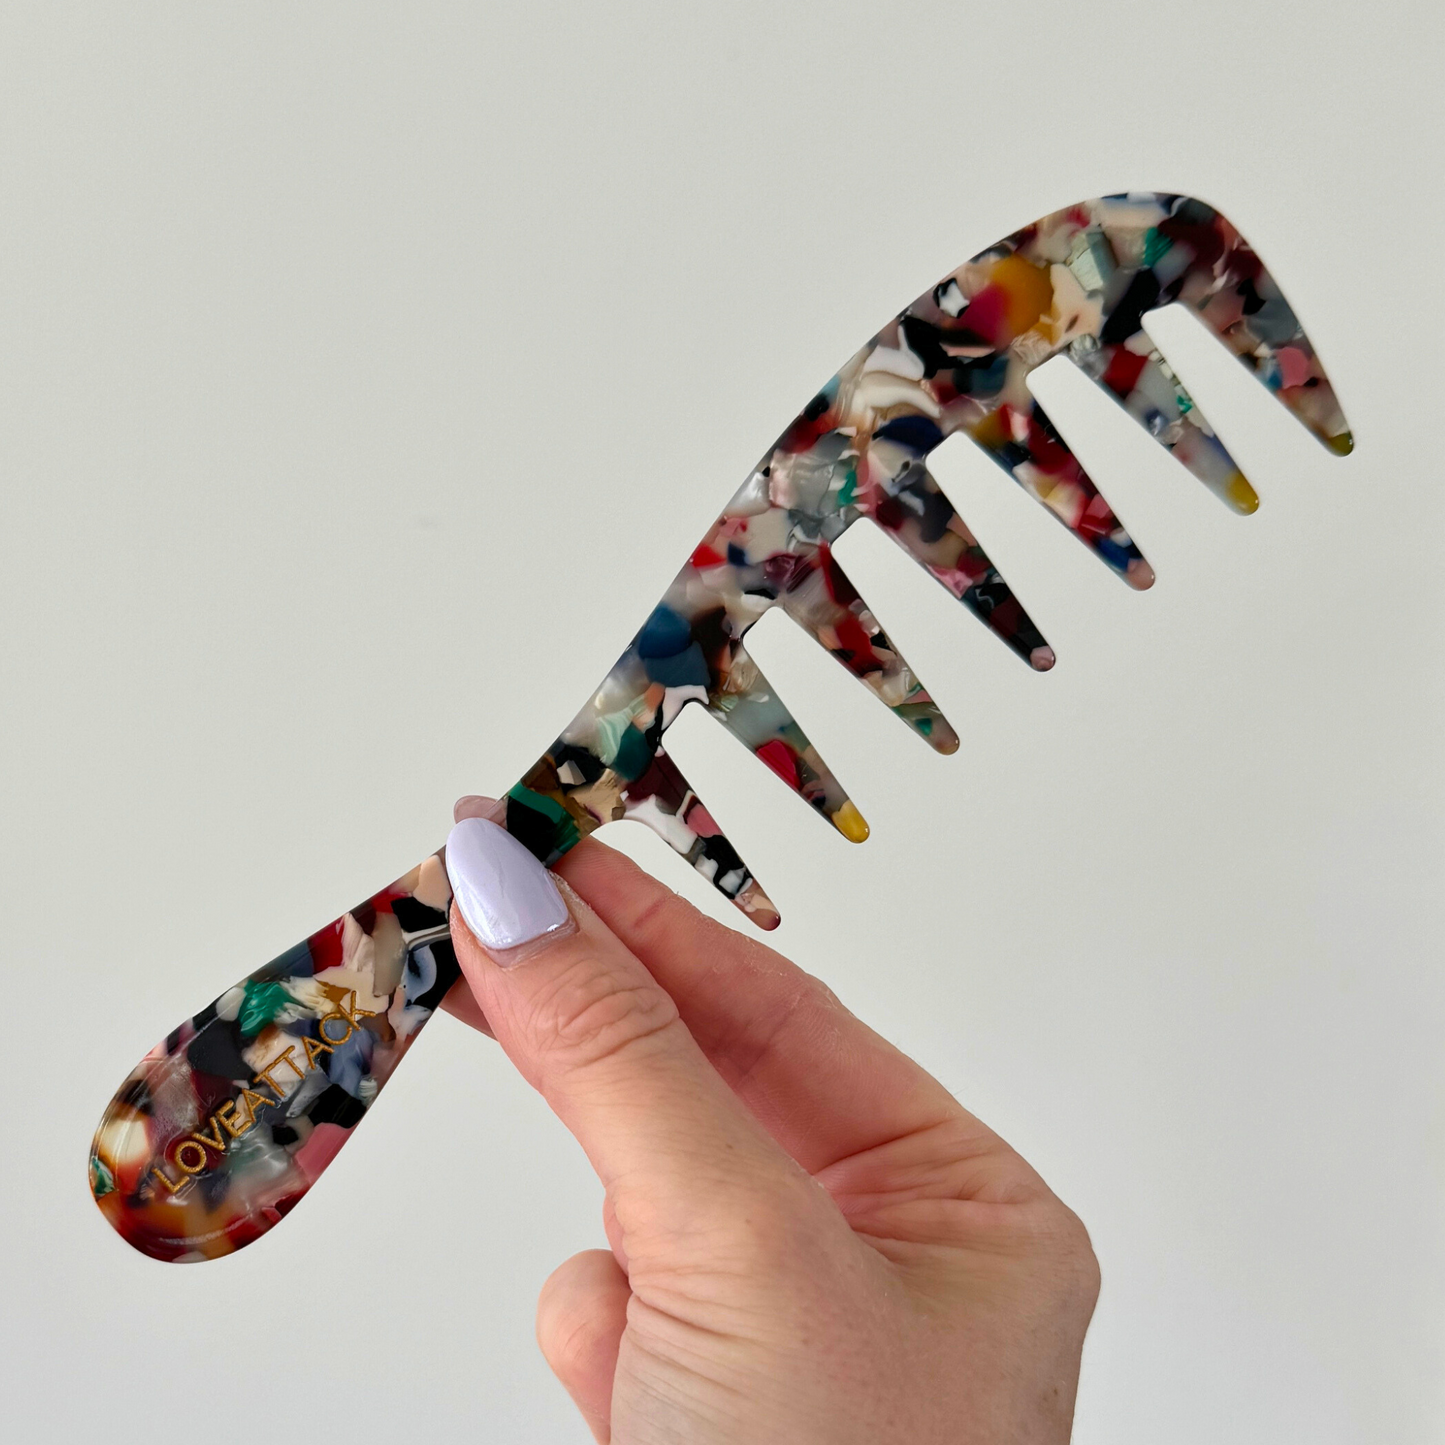 Ultra Wide Tooth Cellulose Acetate Hair Comb